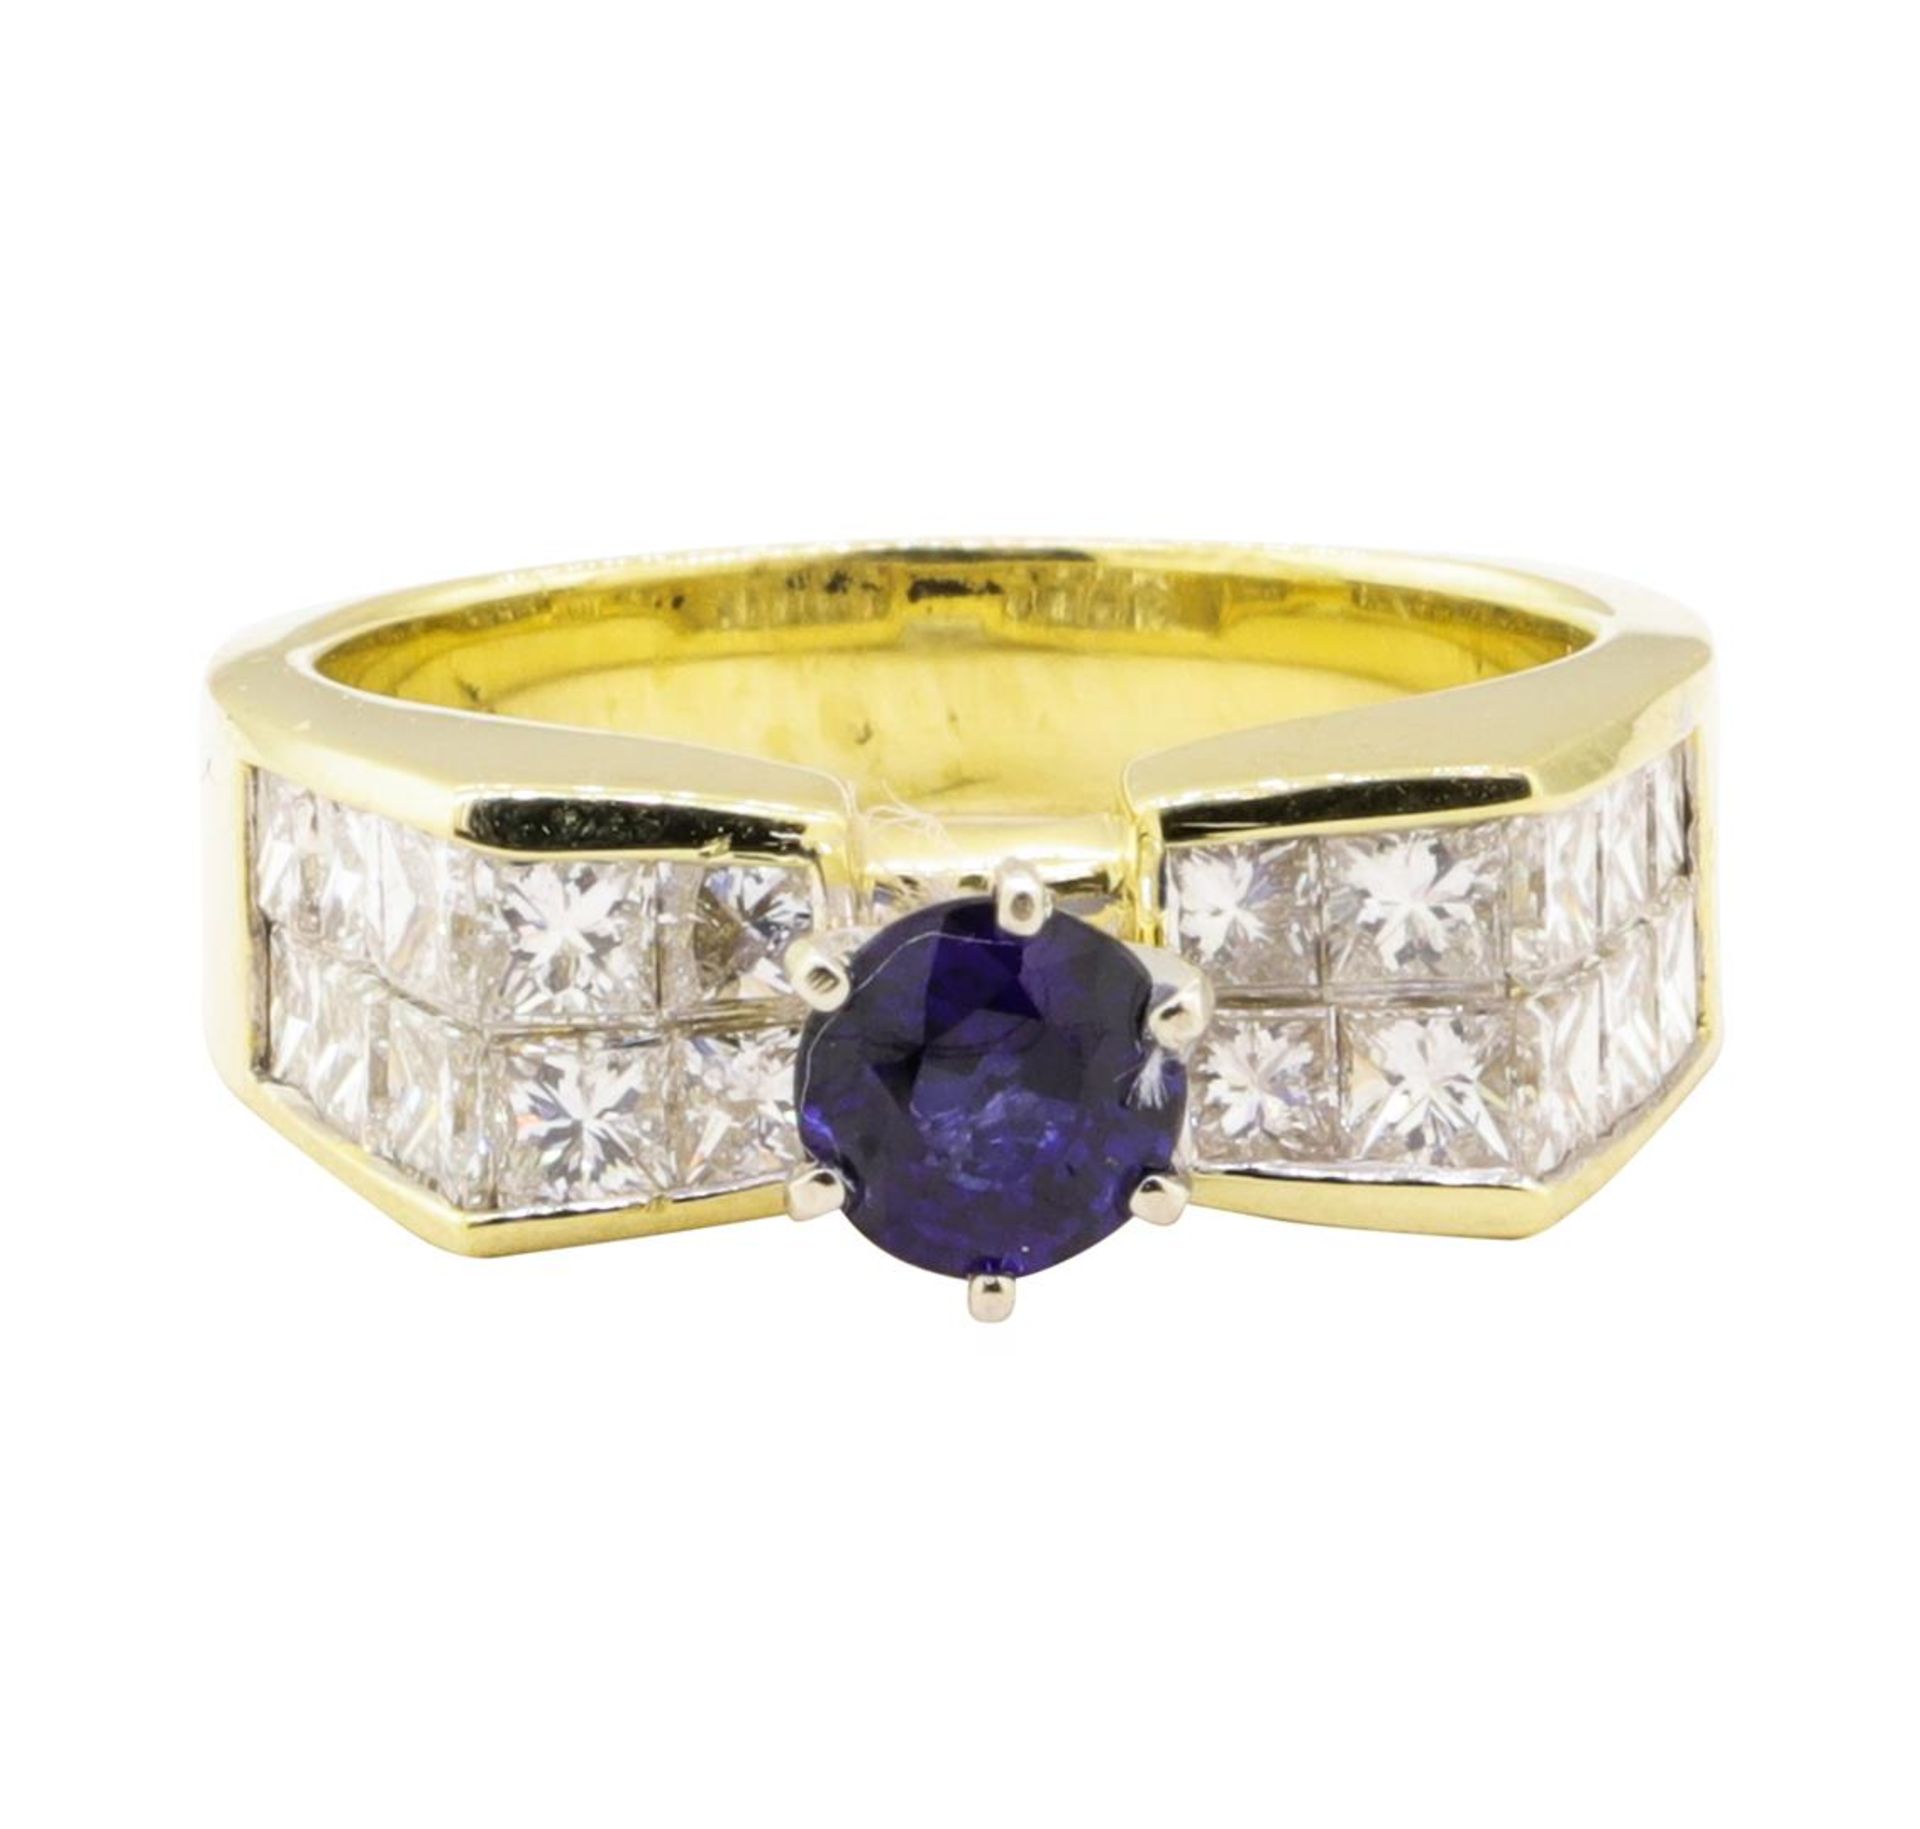 2.45 ctw Blue Sapphire And Diamond Ring - 18KT Yellow Gold - Image 2 of 5